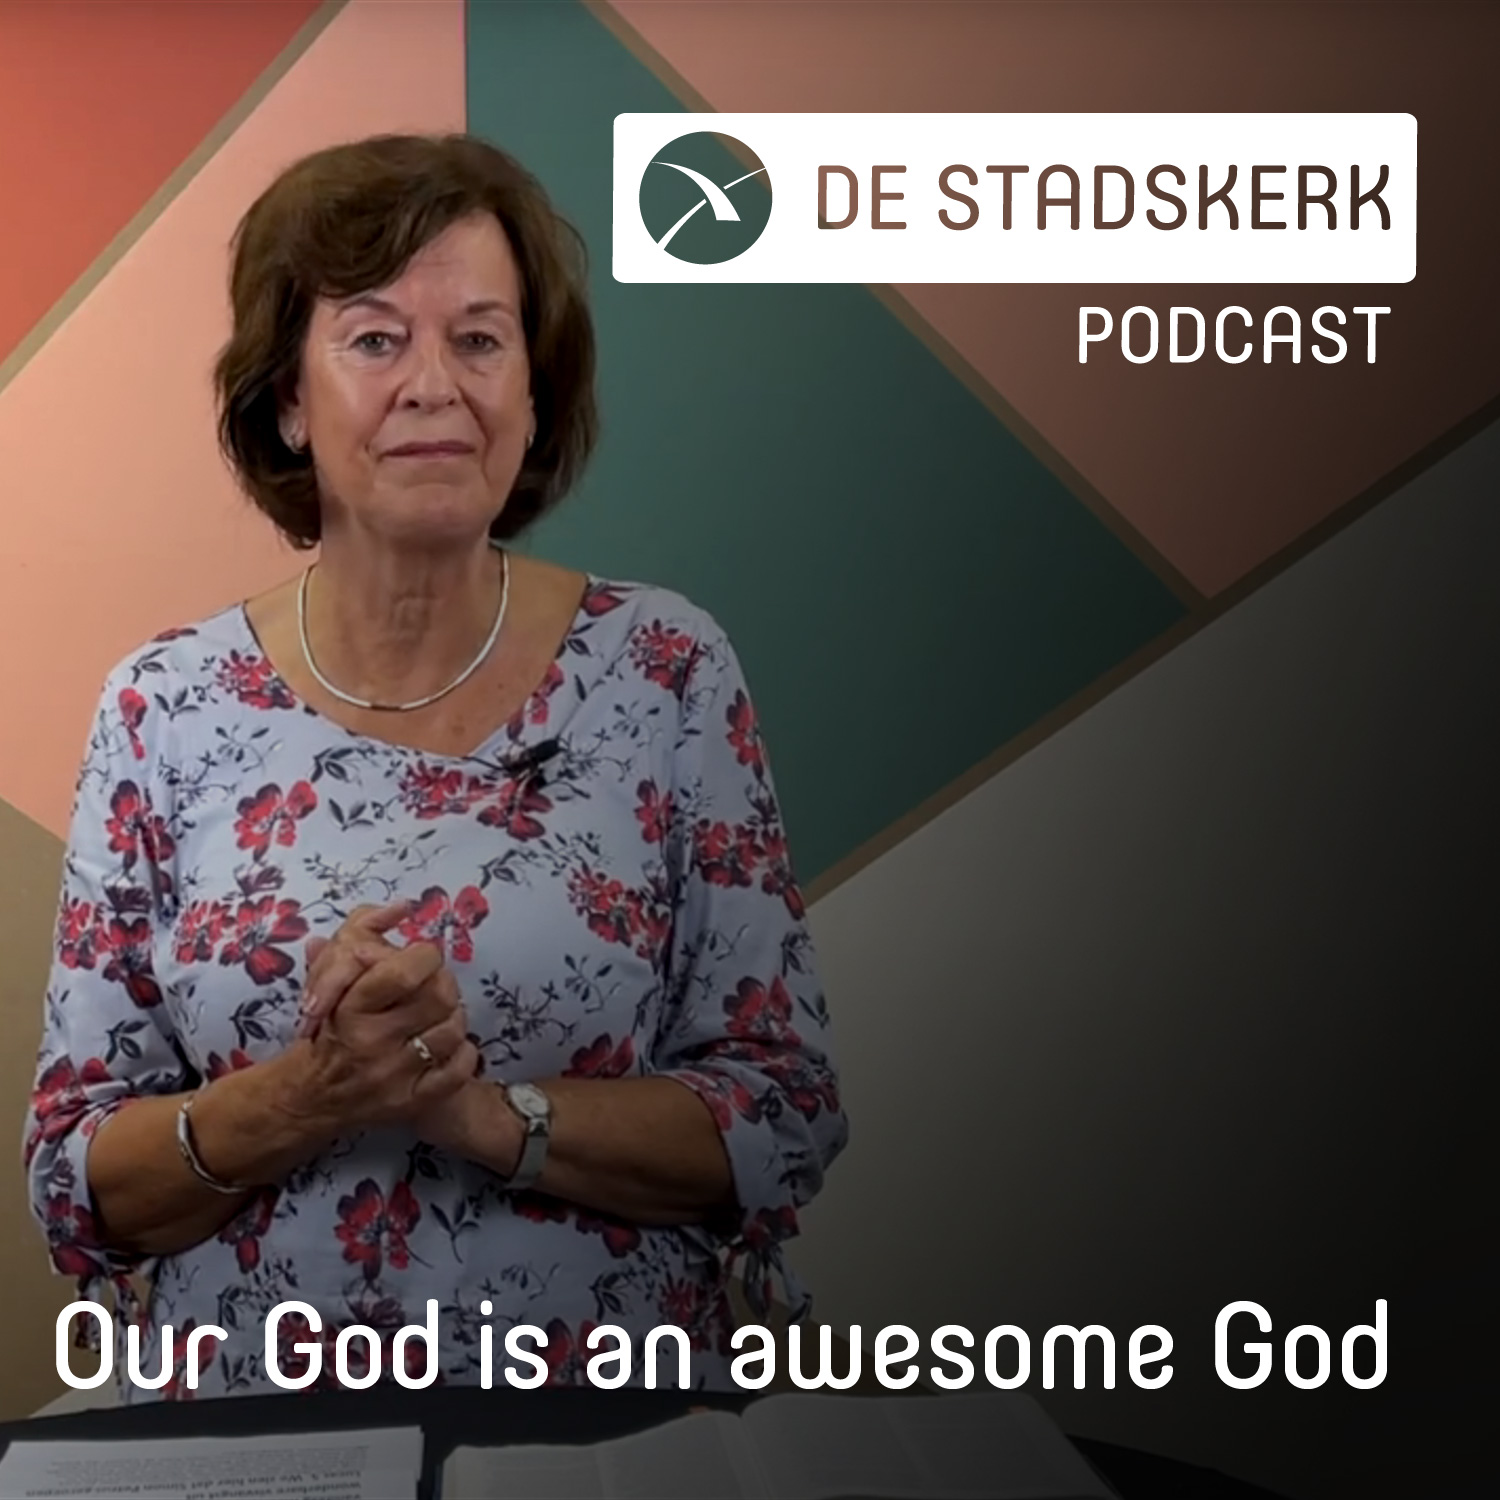 Our God is an awesome God | Els Fleurke